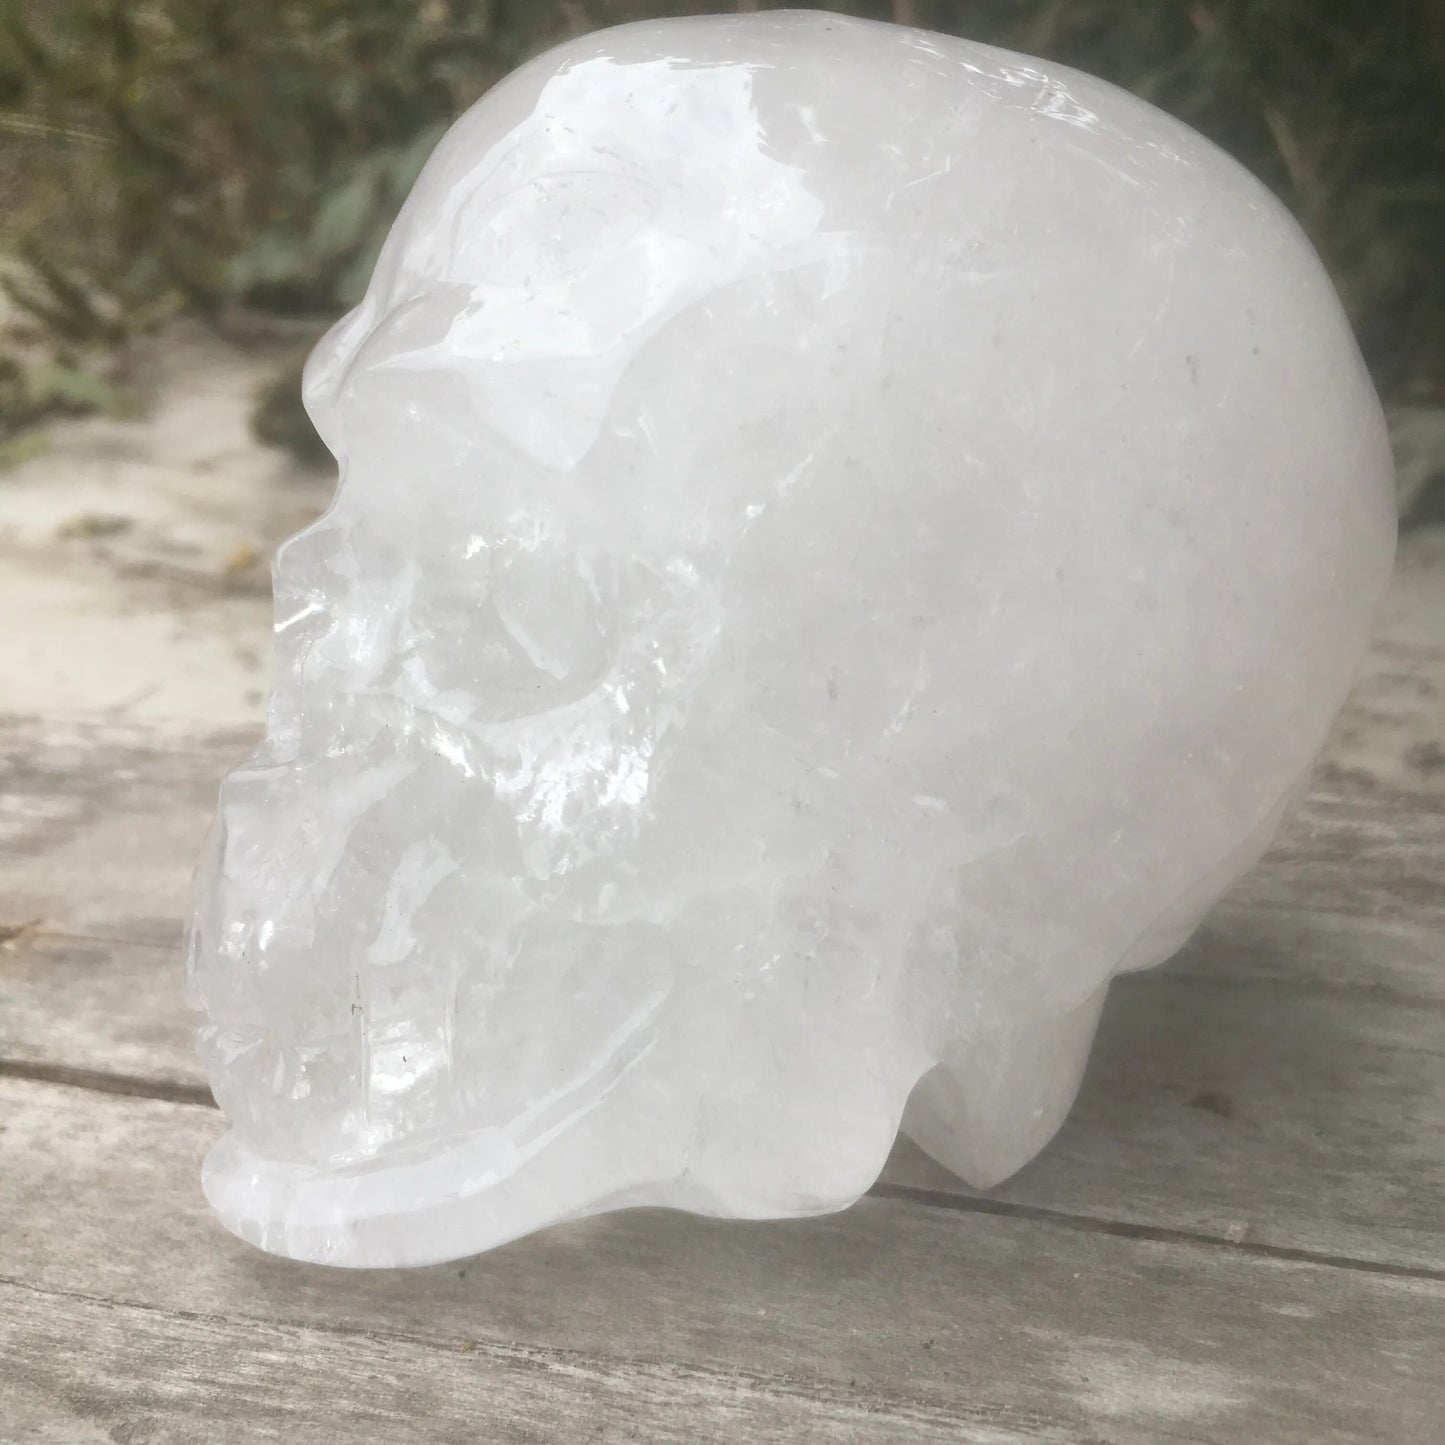 Crystal Stones, Natural white crystal skulls- The Witchy Gypsy